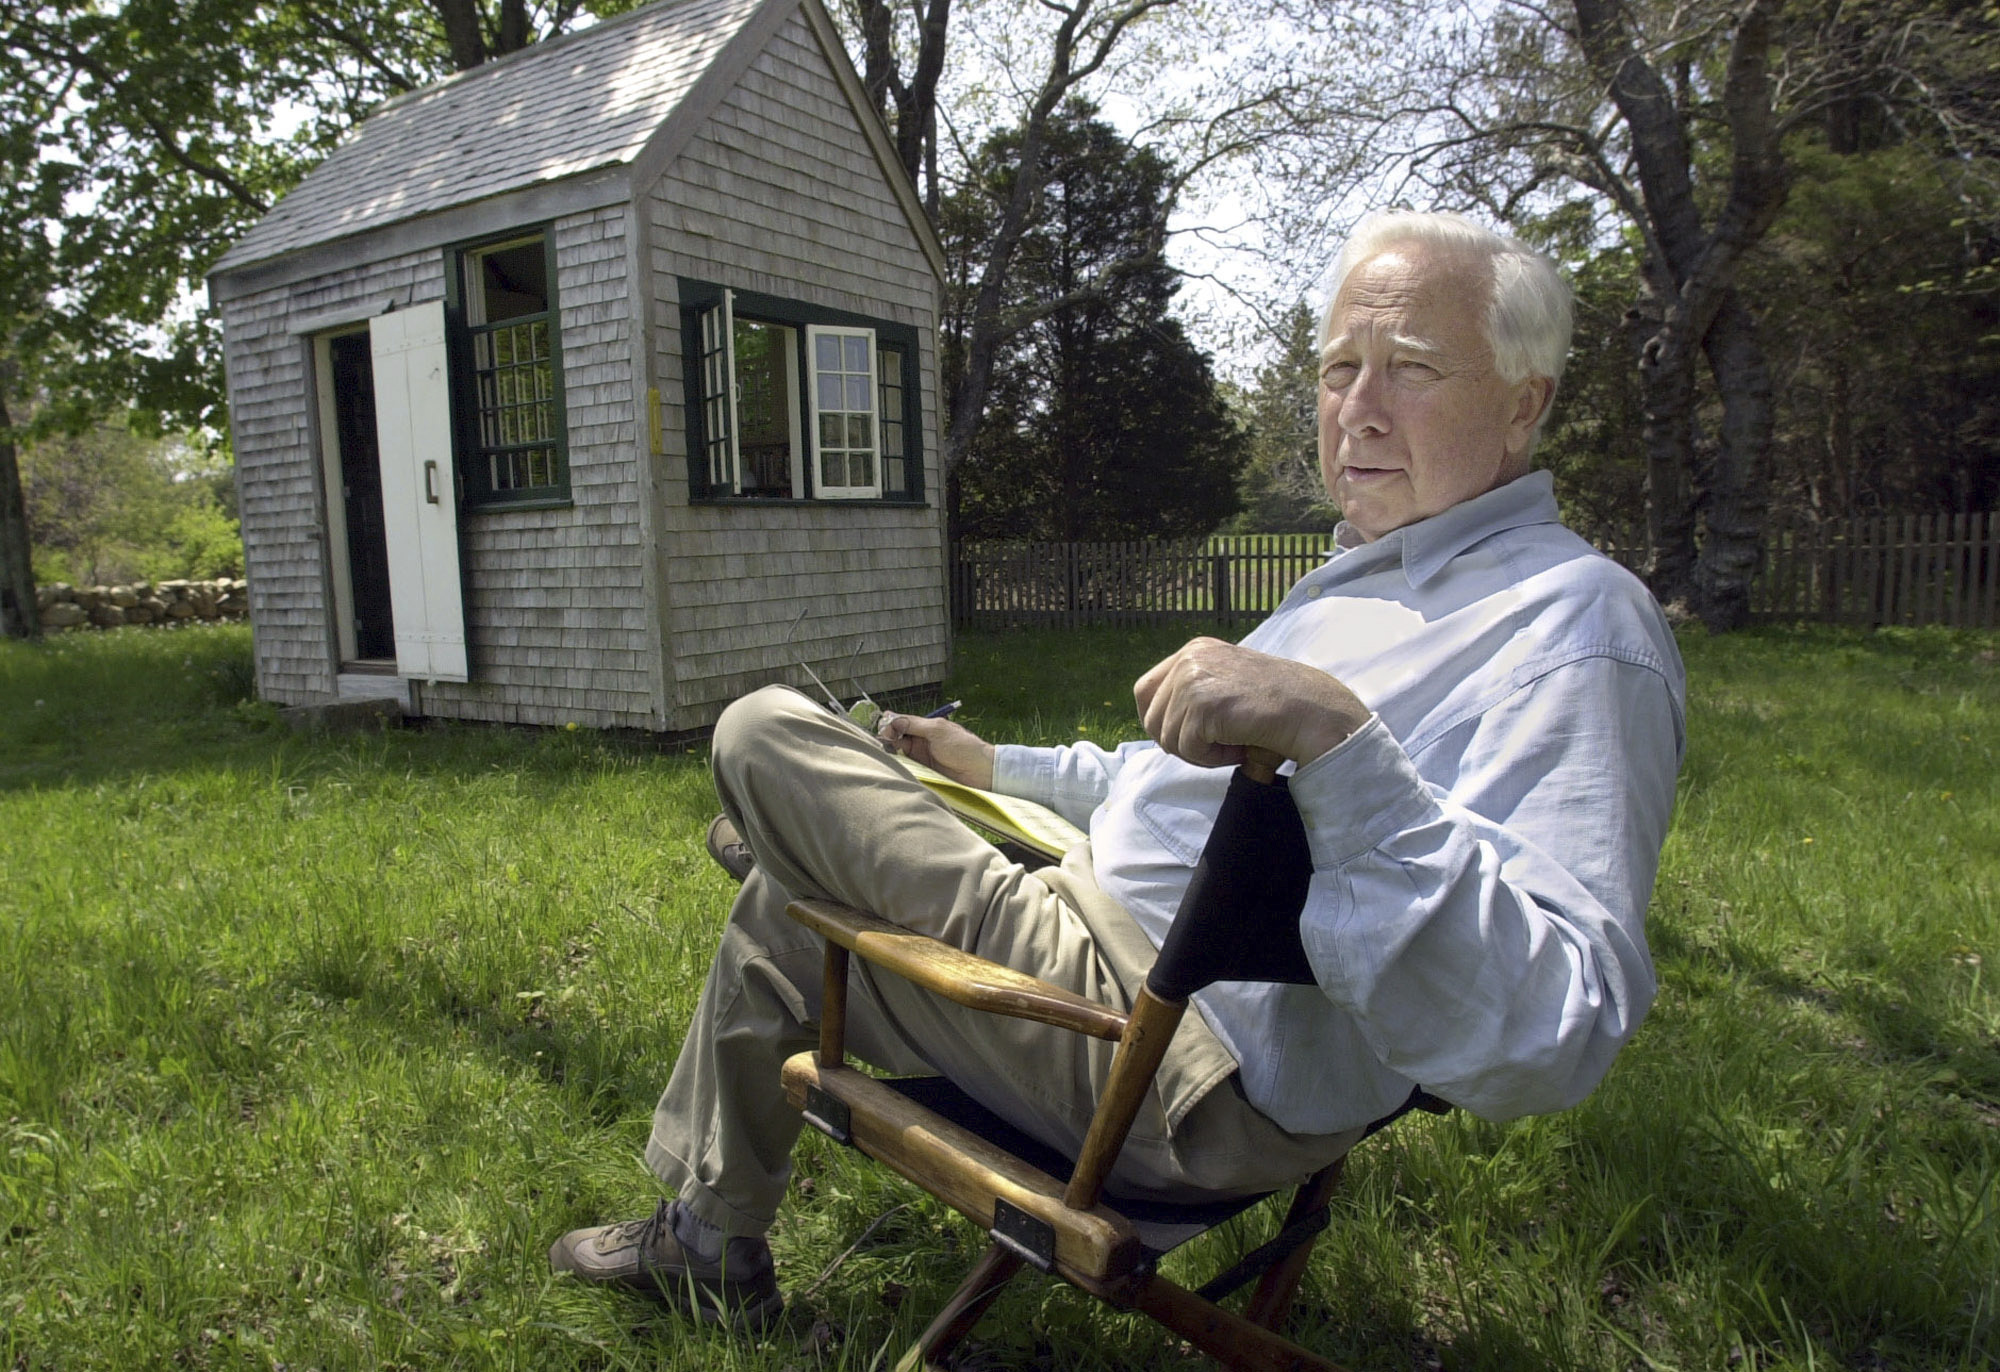 FILE - Writer and historian David McCullough appears at his Martha's Vineyard property in West Tisbury, Mass., on May 12, 2001. McCullough, the Pulitzer Prize-winning author whose lovingly crafted narratives on subjects ranging from the Brooklyn Bridge to Presidents John Adams and Harry Truman made him among the most popular and influential historians of his time, died Sunday in Hingham, Massachusetts. He was 89. (AP Photo/Steven Senne, File)